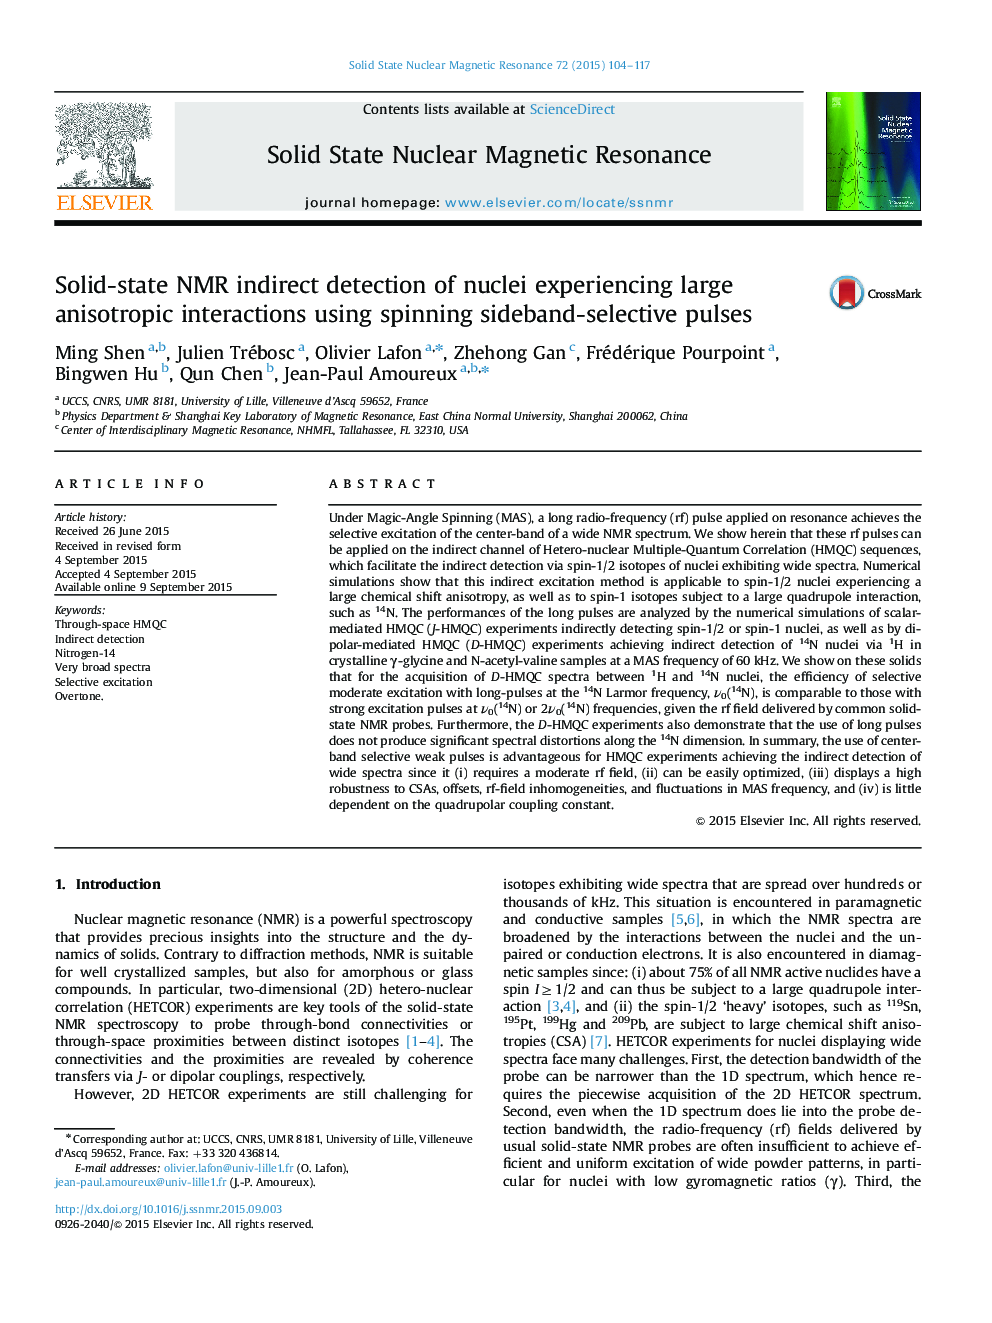 Solid-state NMR indirect detection of nuclei experiencing large anisotropic interactions using spinning sideband-selective pulses